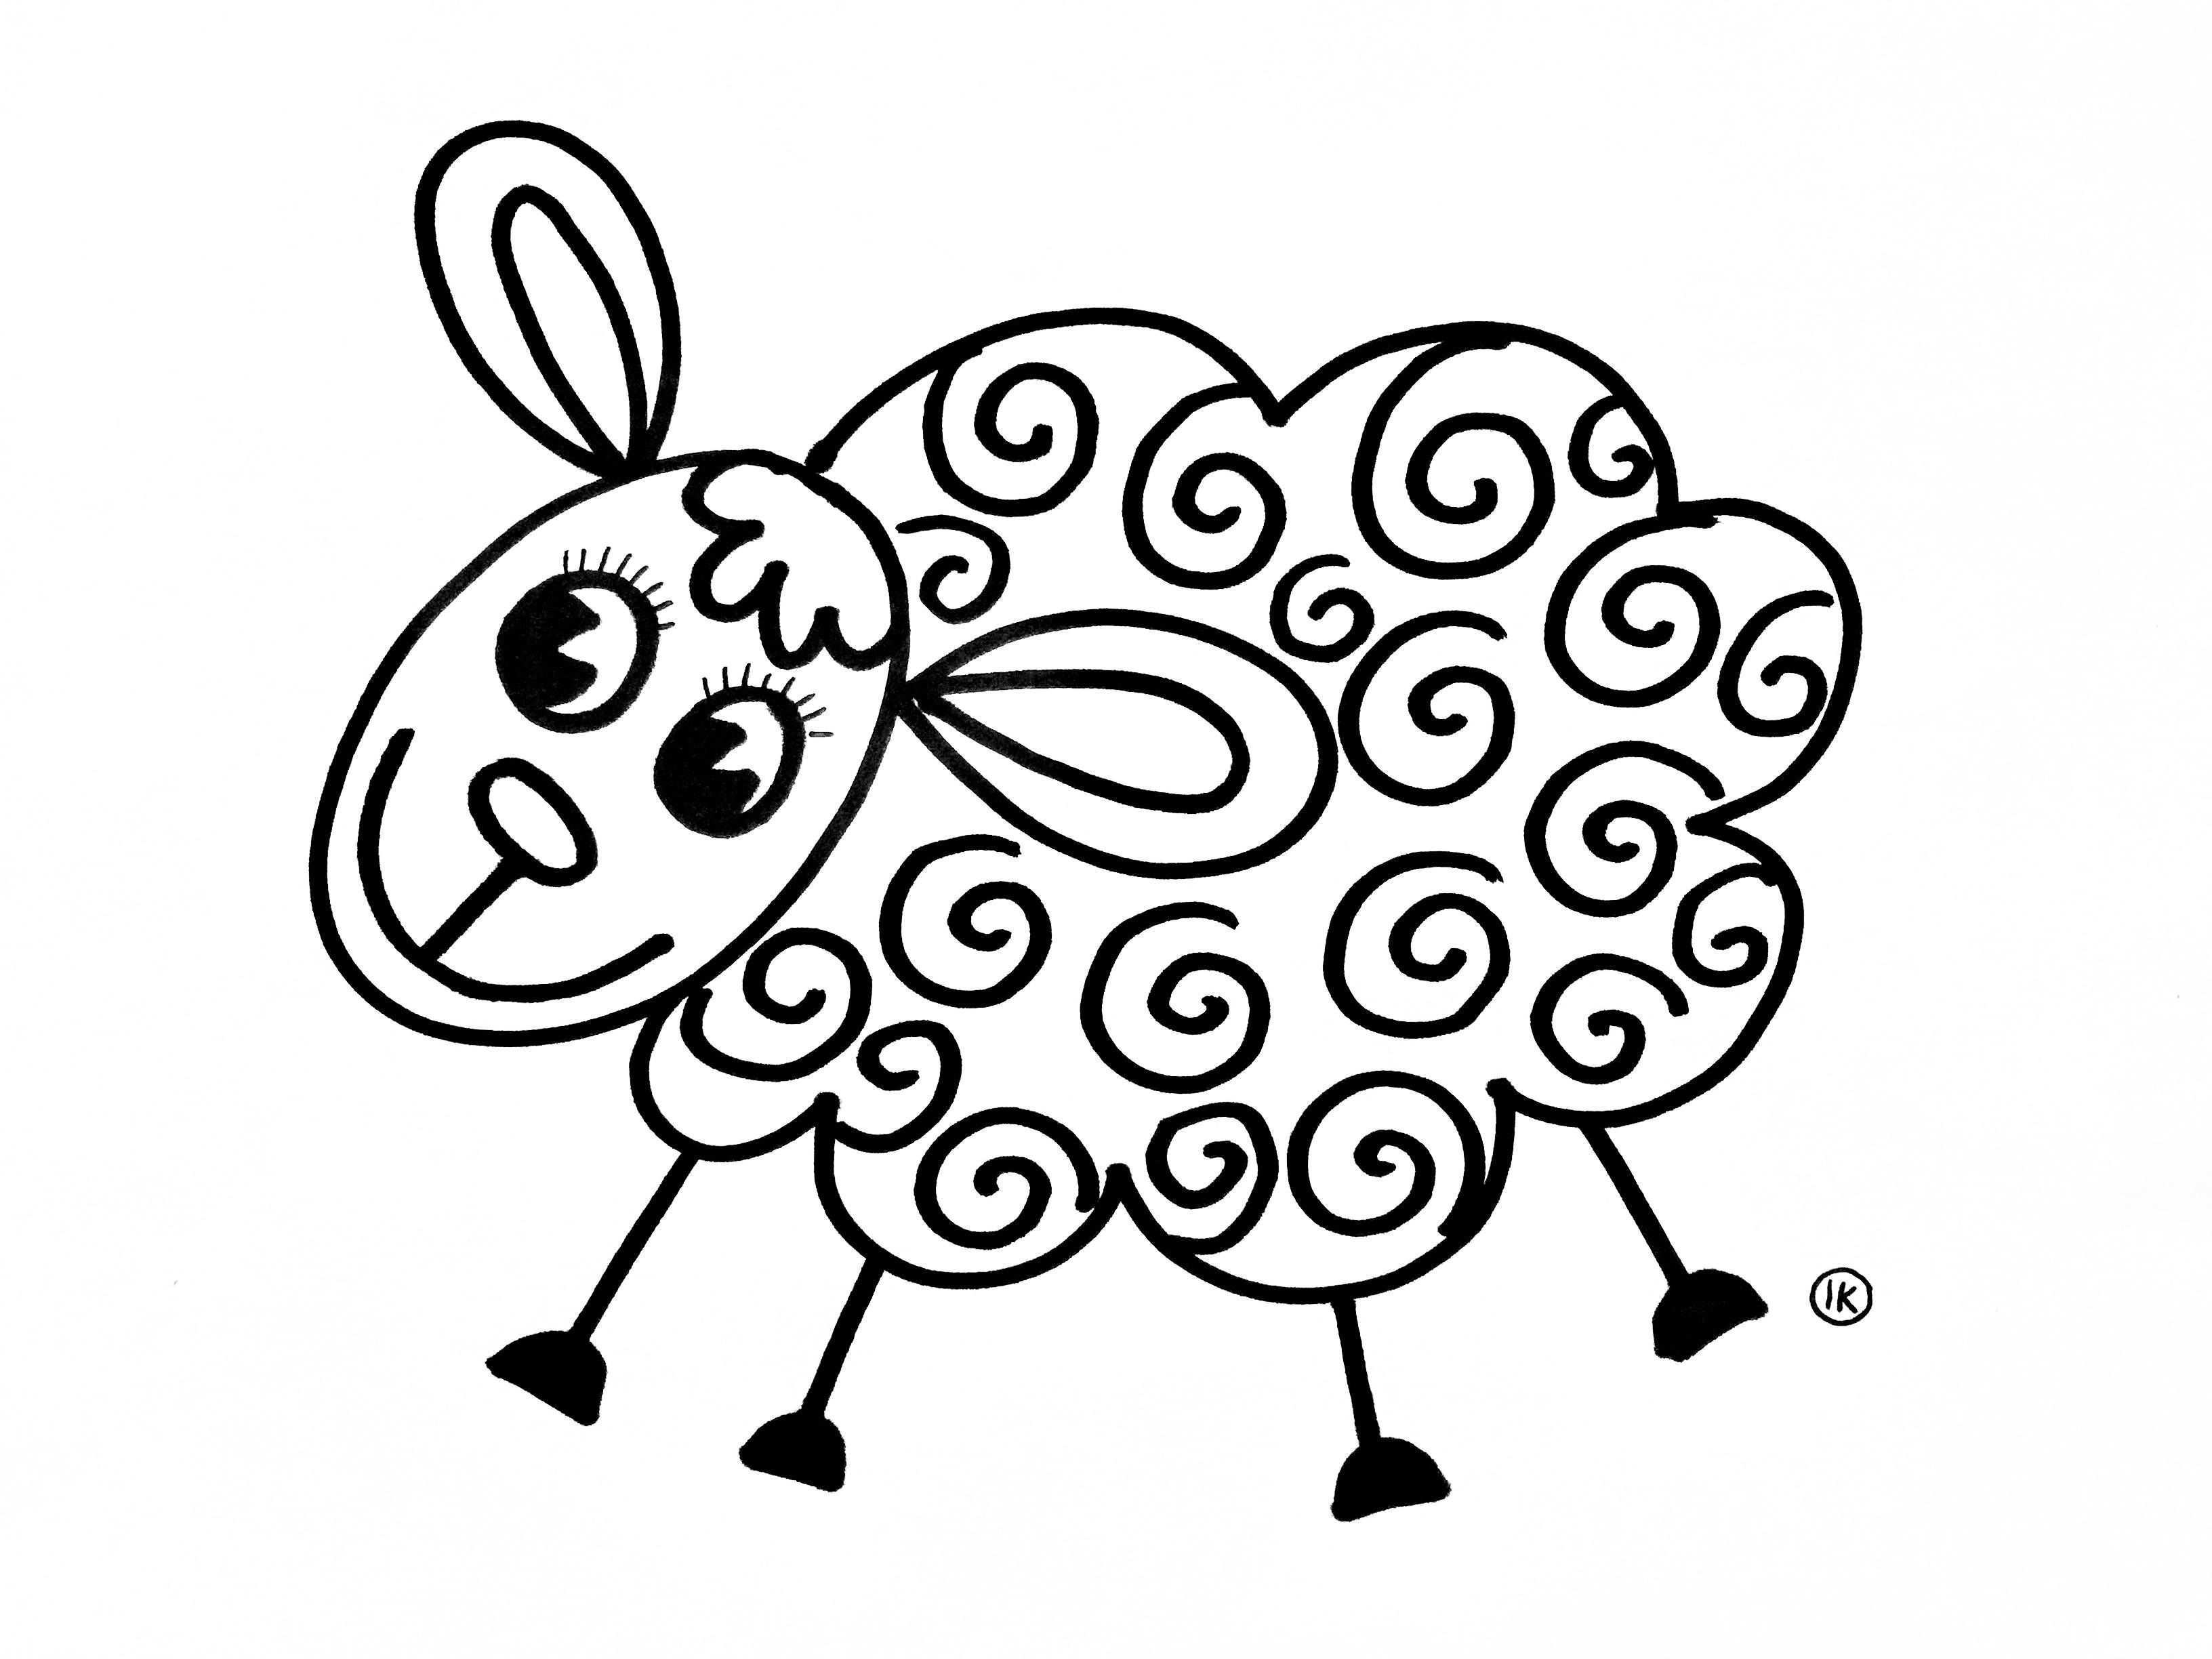 Coloring Sheep Spring Tinkering Creative Coloringpages Coloringpage De Knutseljuf Ede Easy Drawings Sheep And Lamb Embroidery Patterns